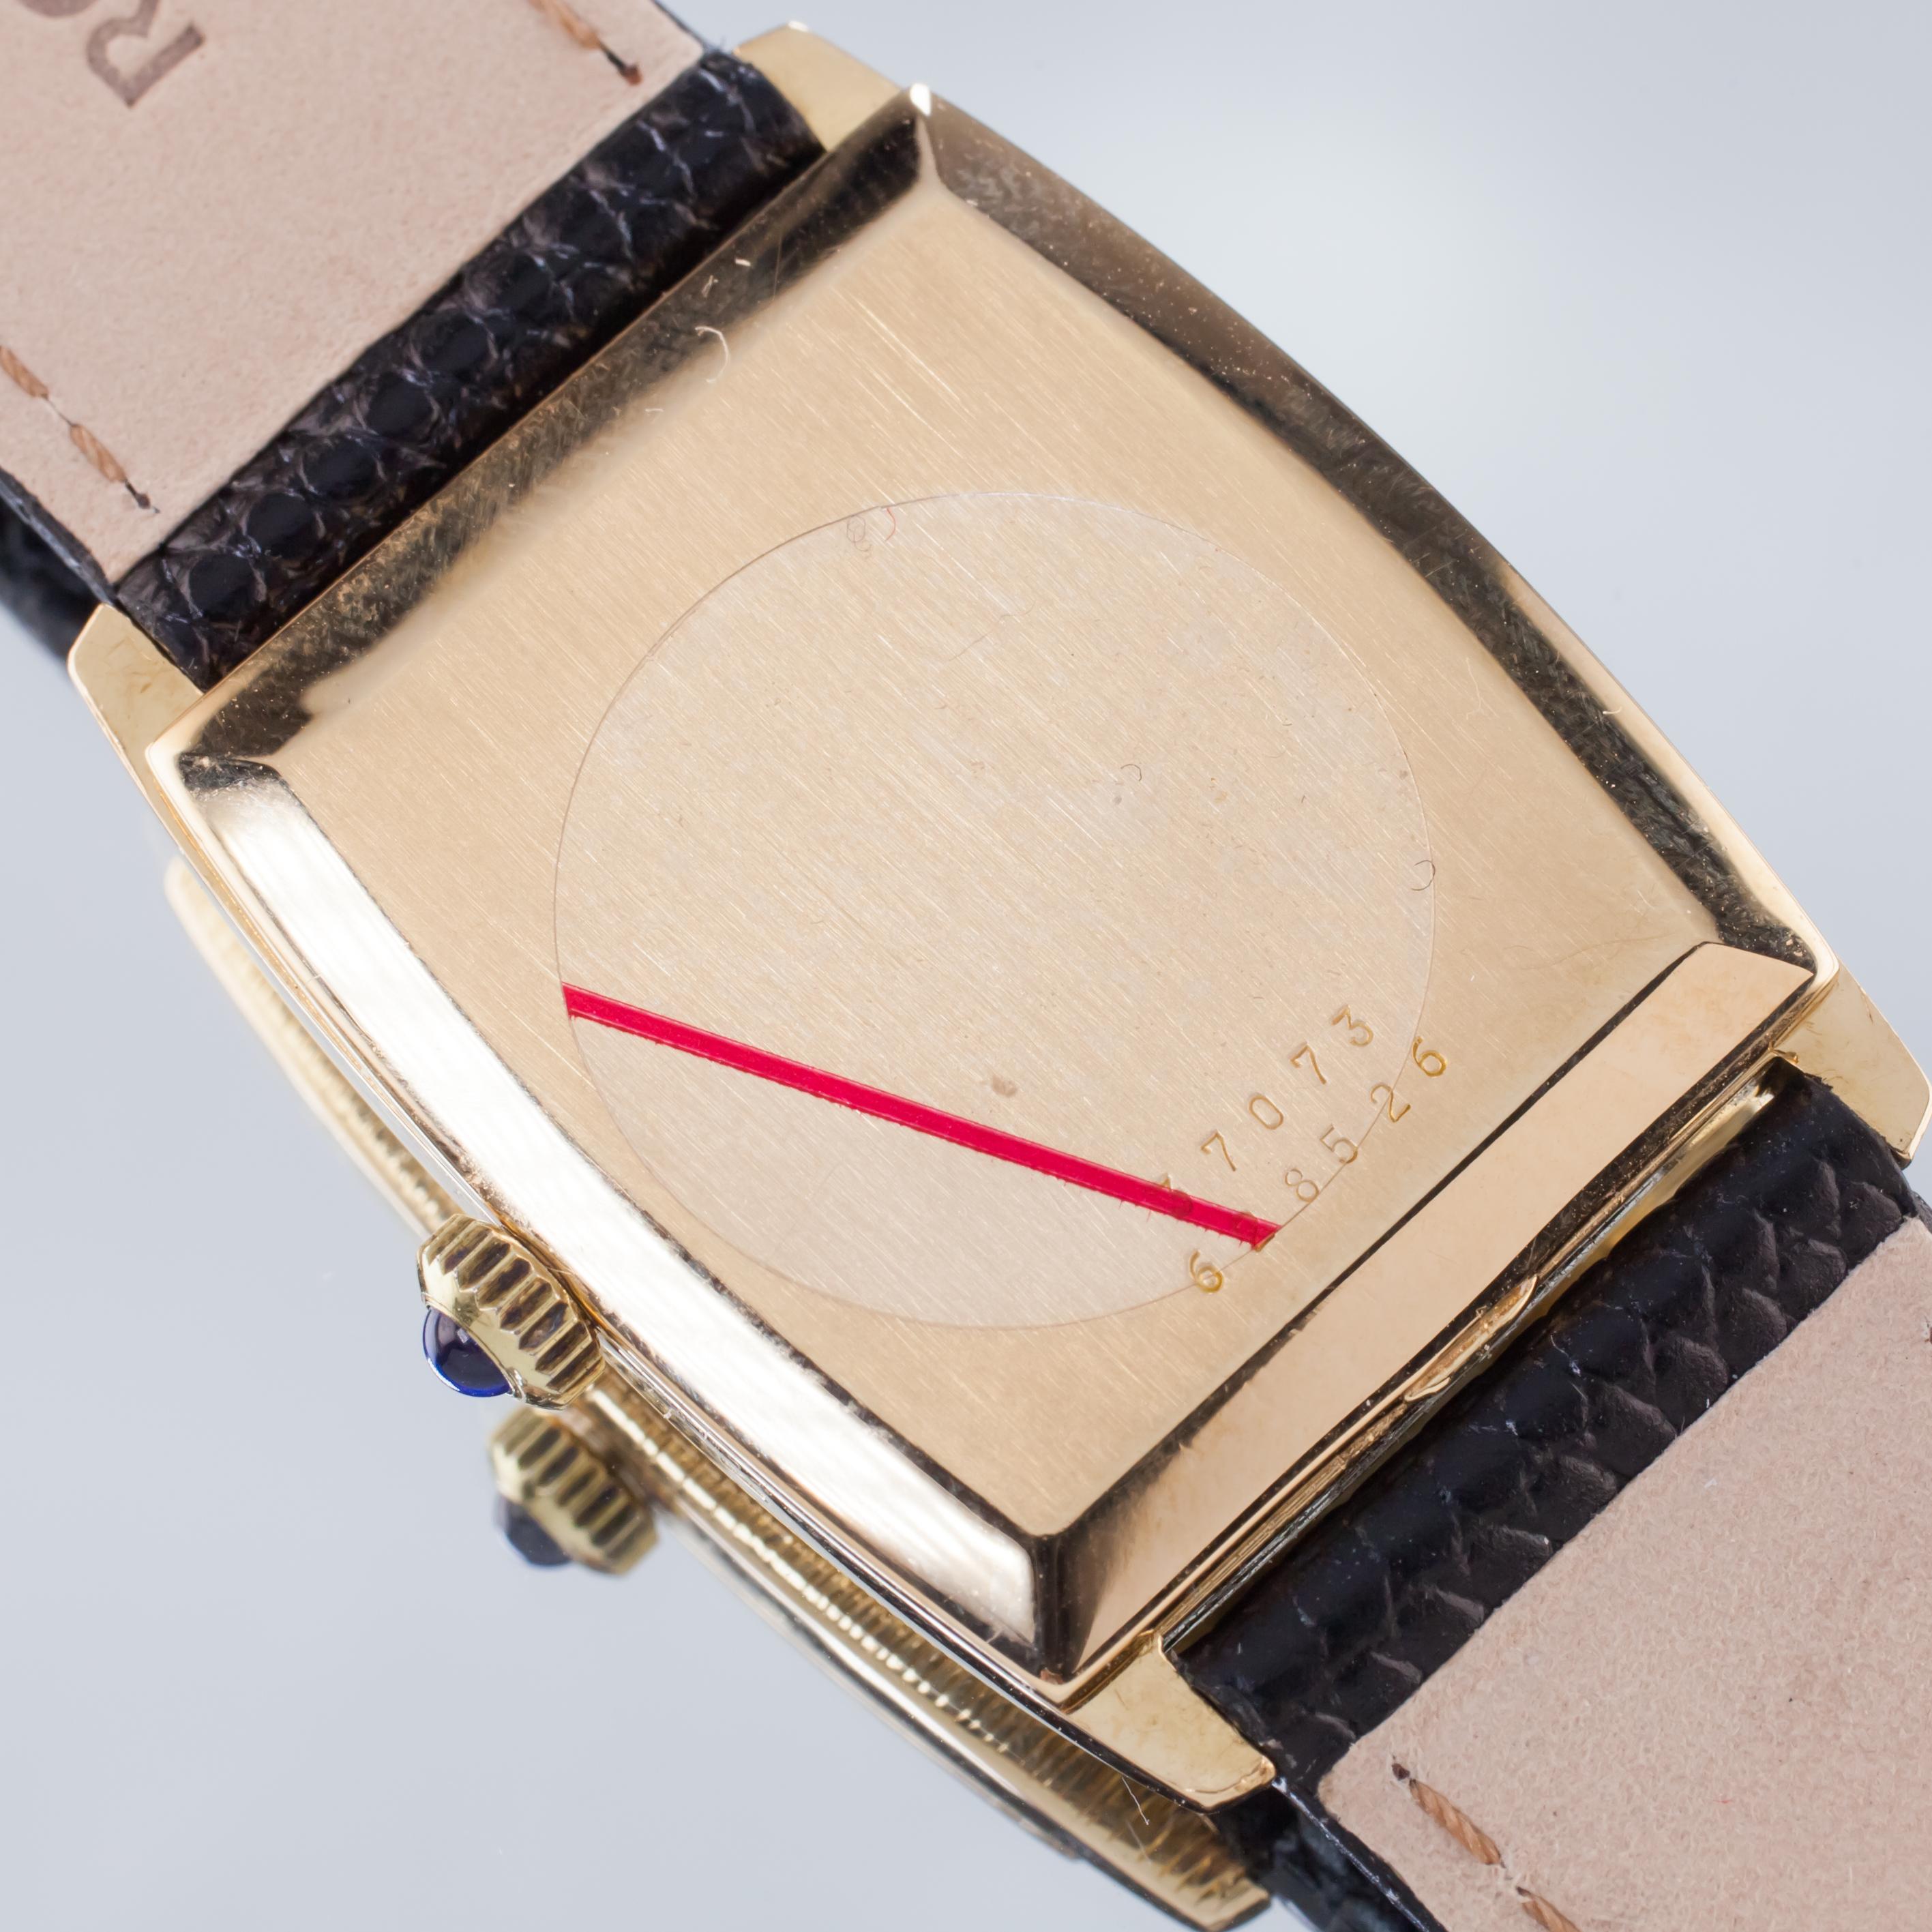 Movement: 1050 (Hand-Winding Mechanical Movement, 17 Jewels)
Case #37073
Serial #628526
18k Yellow Gold Tonneau Case w/ Wood Textured Finish
24 mm Wide (26 mm w/ Crown)
28 mm Long
Lug-to-Lug Width = 18 mm
Lug-to-Lug Distance = 36 mm
Oval Gold Dial